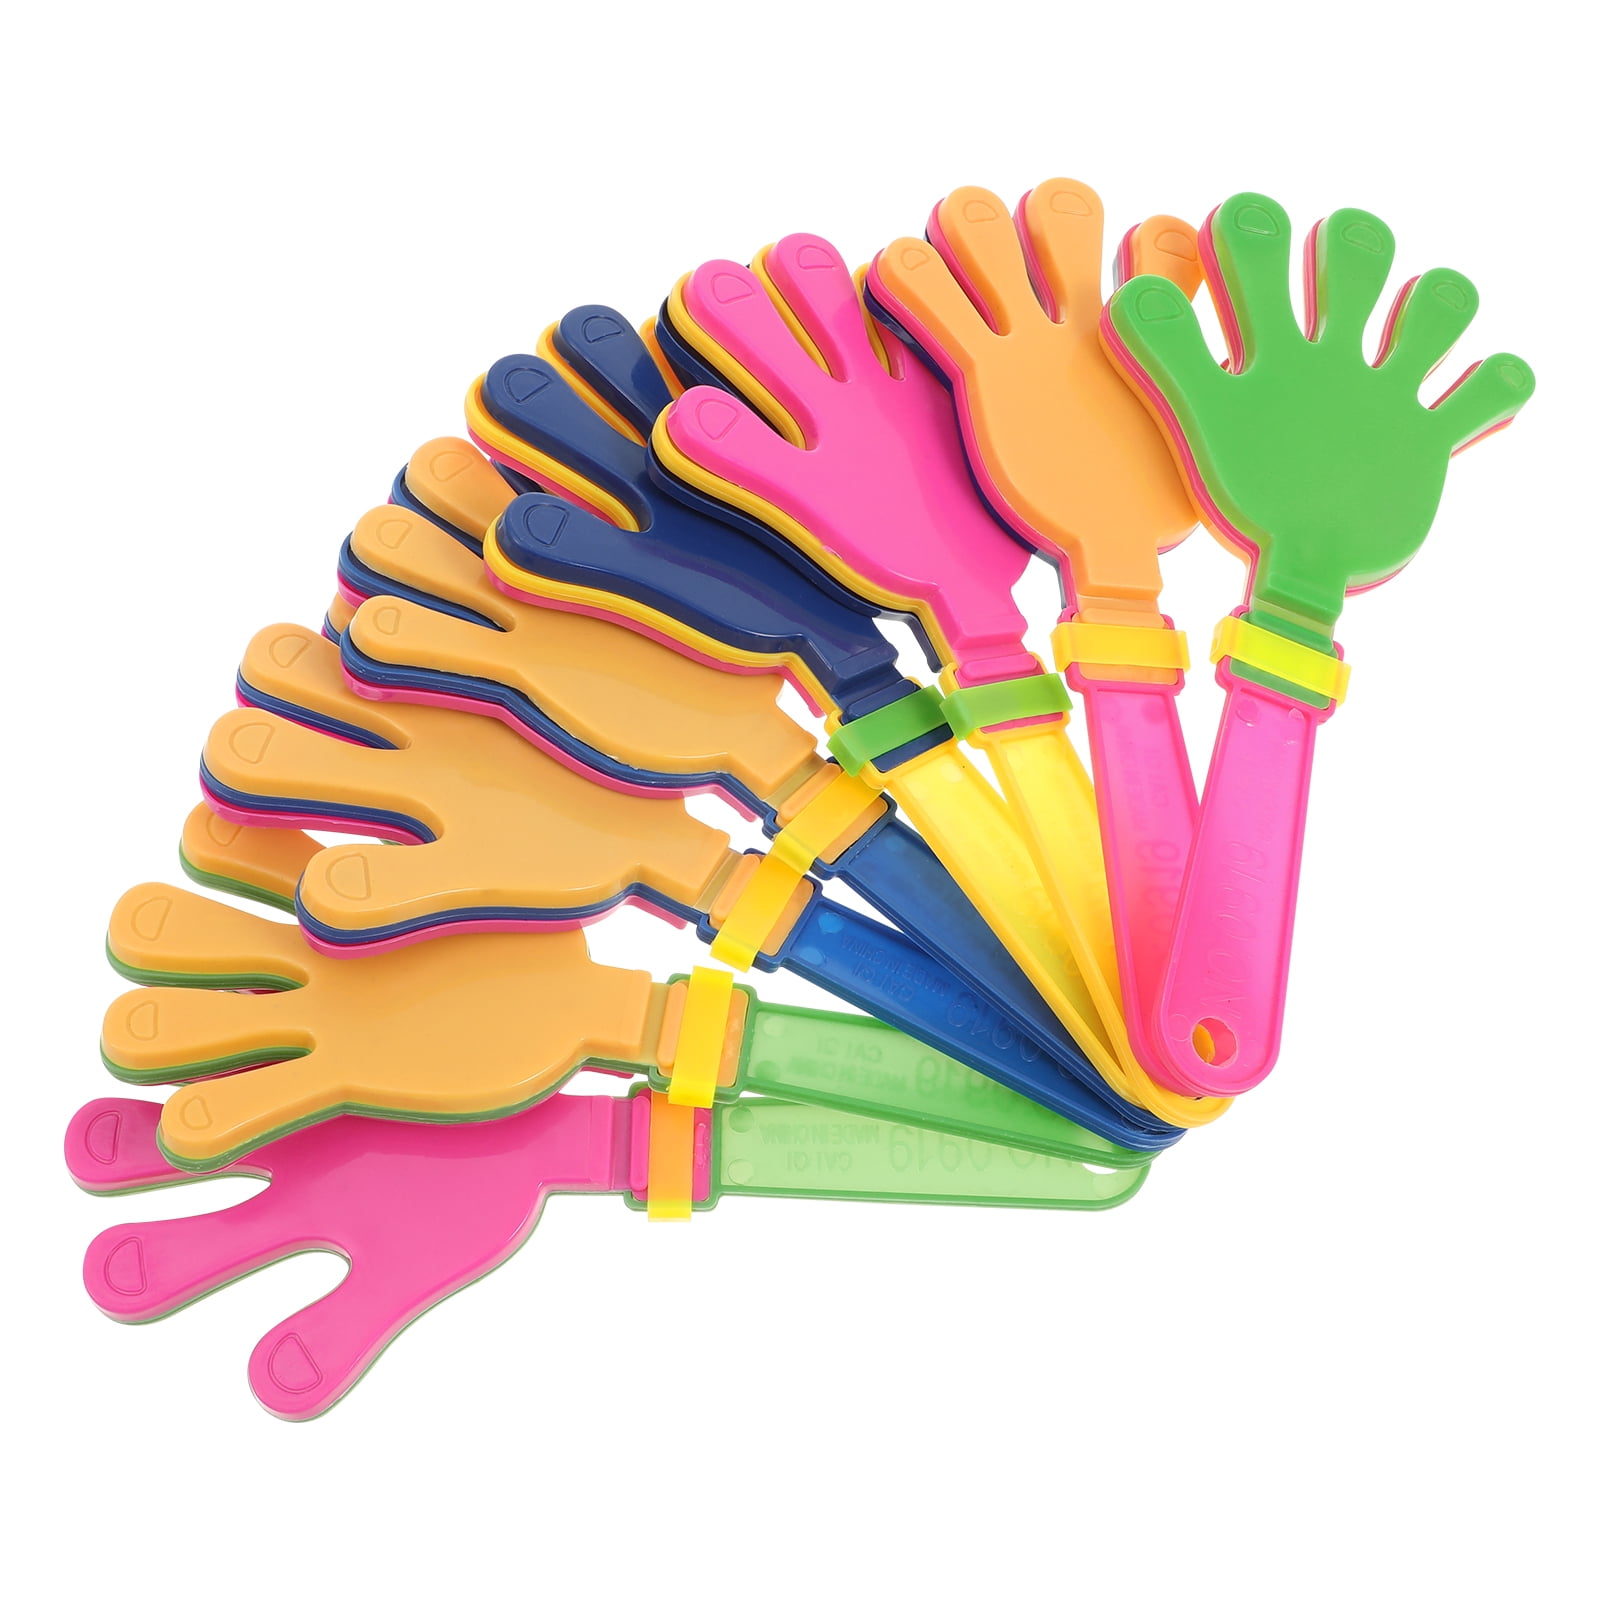 24pcs Plastic Hand Clappers Sporting Events Noisemaker Toys Party Favors for Fiesta Birthday (Random Color), Size: 19.00